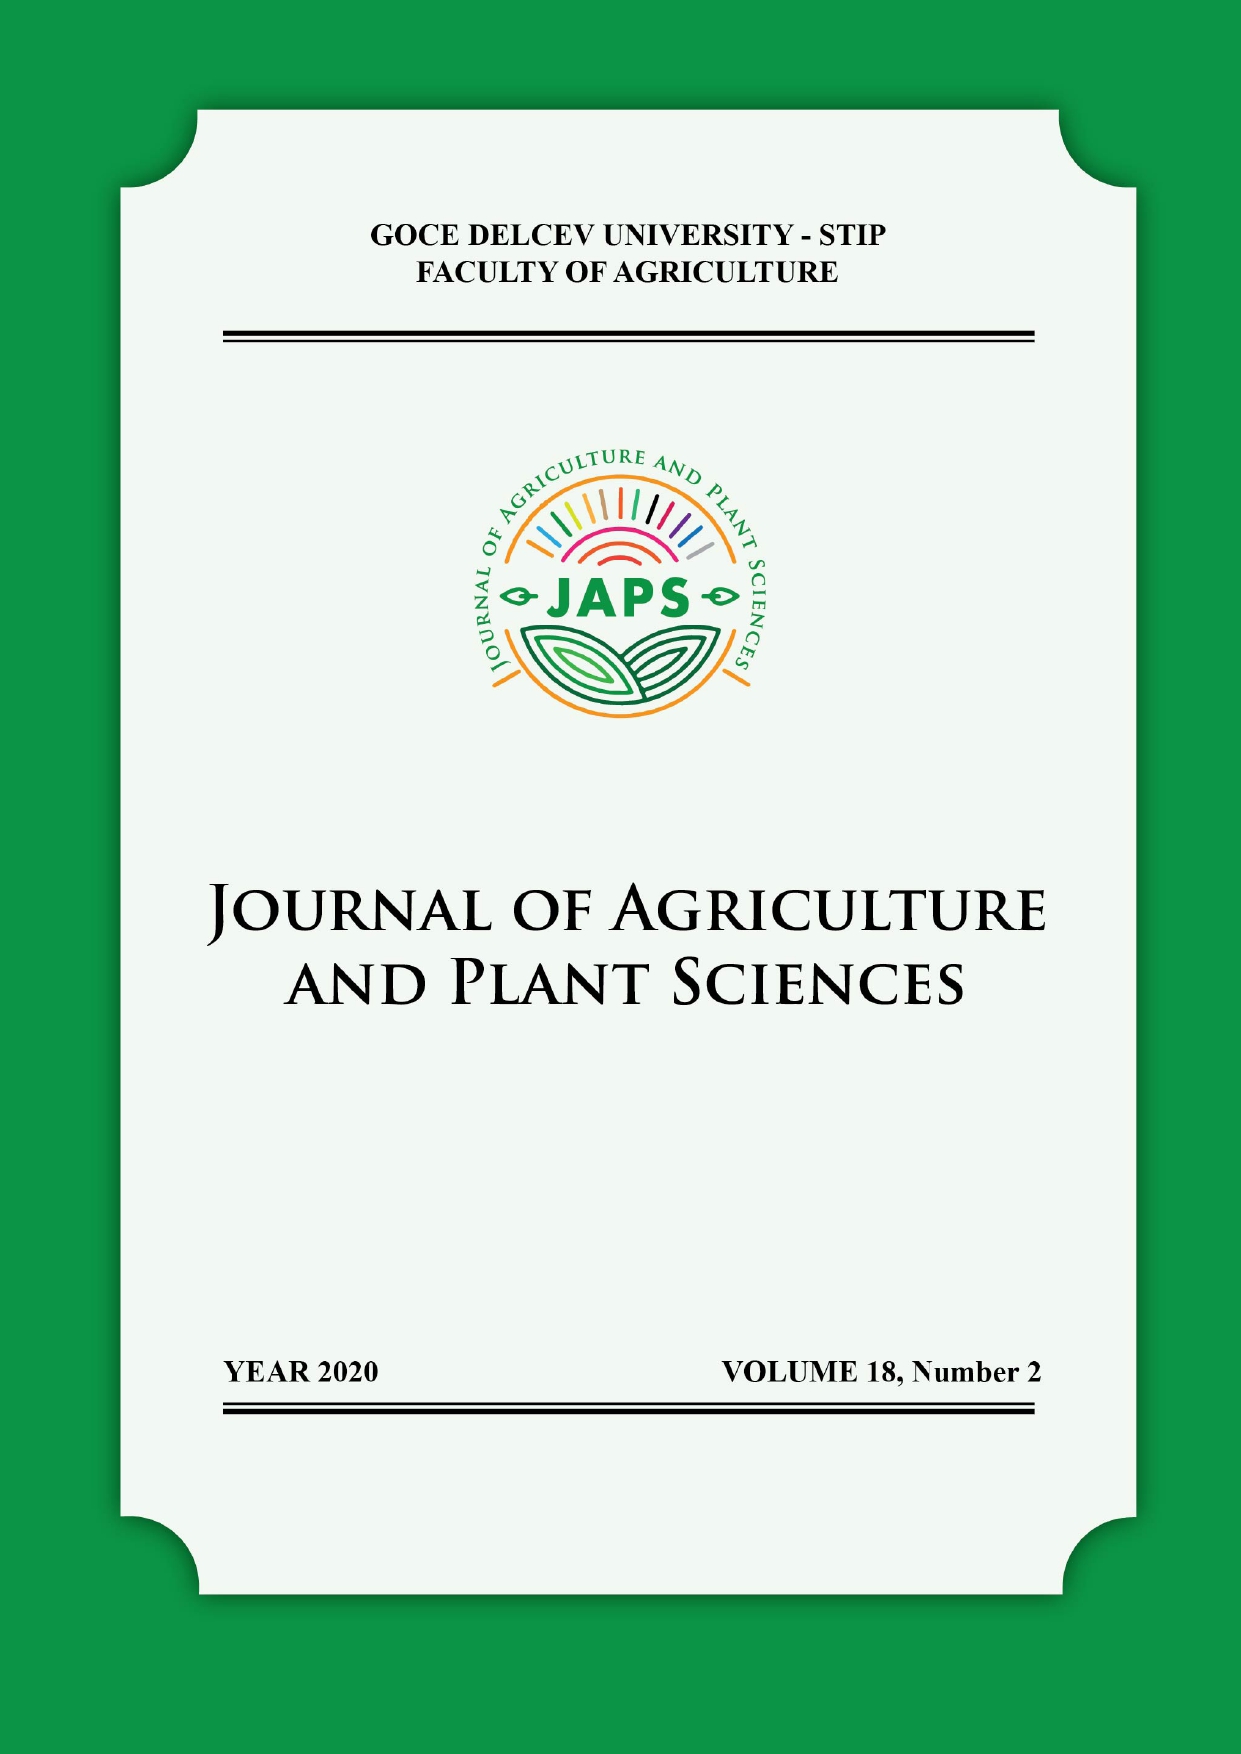 thesis title about crops in agriculture